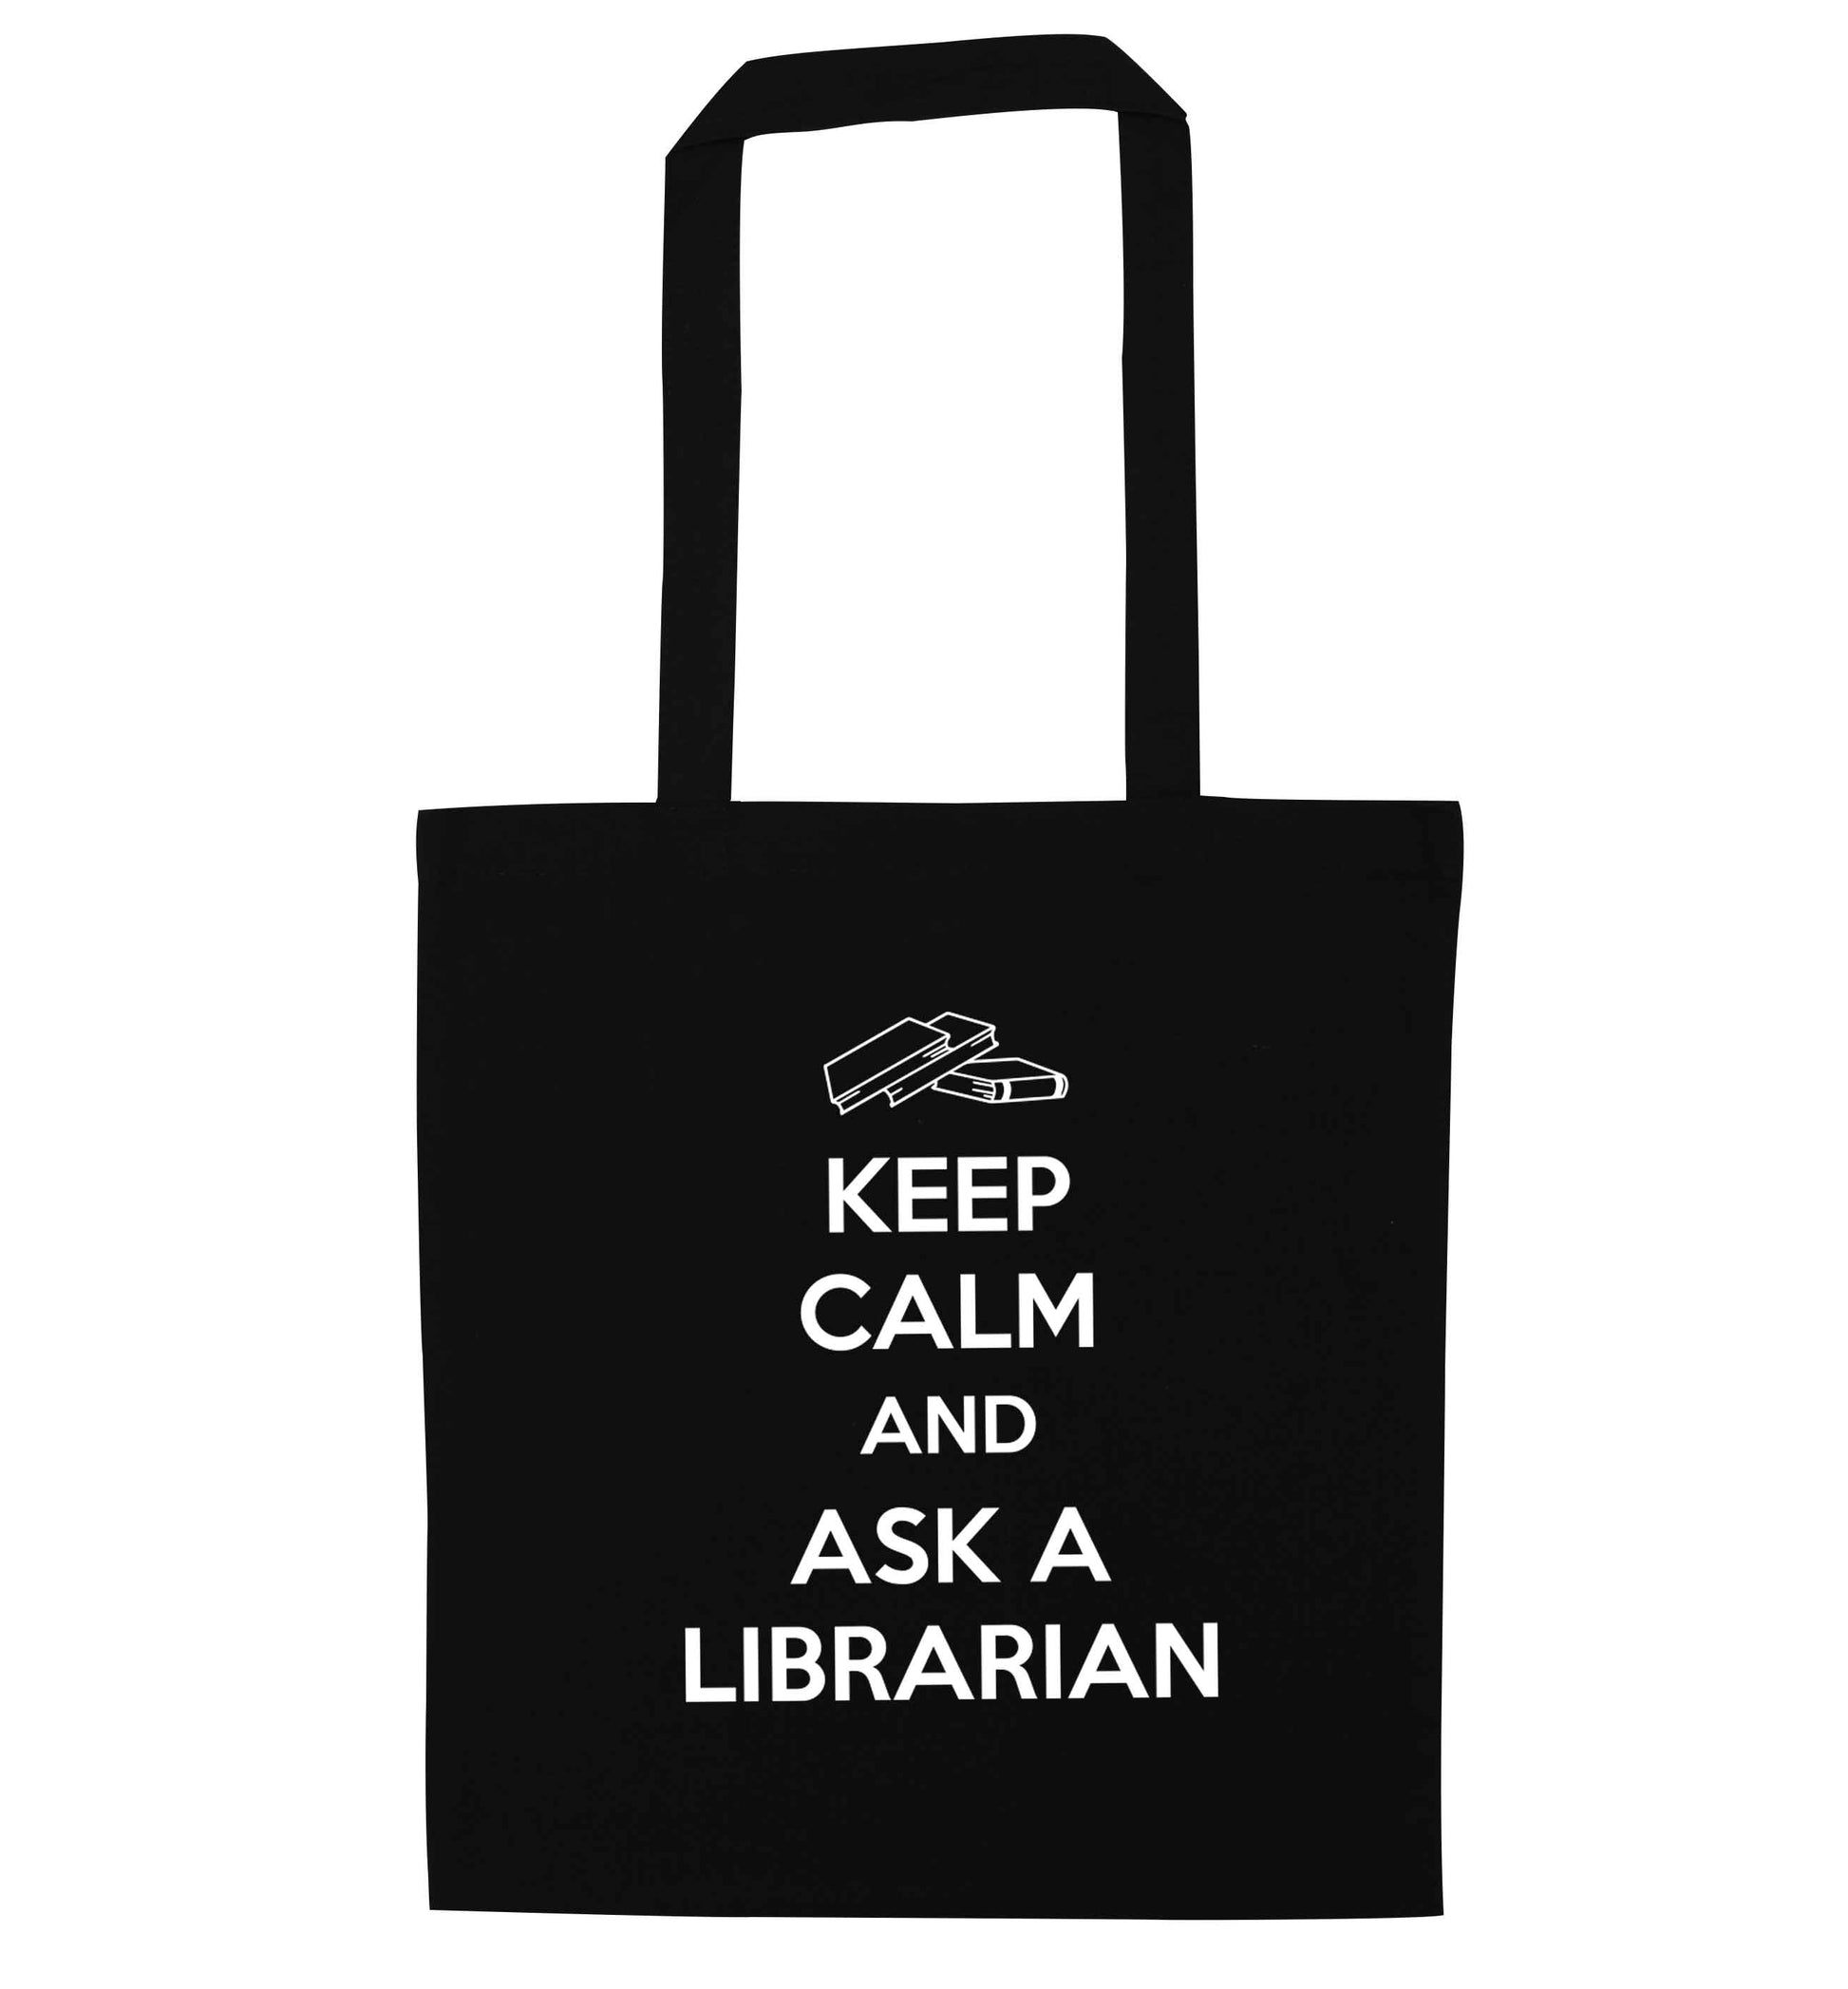 Keep calm and ask a librarian black tote bag